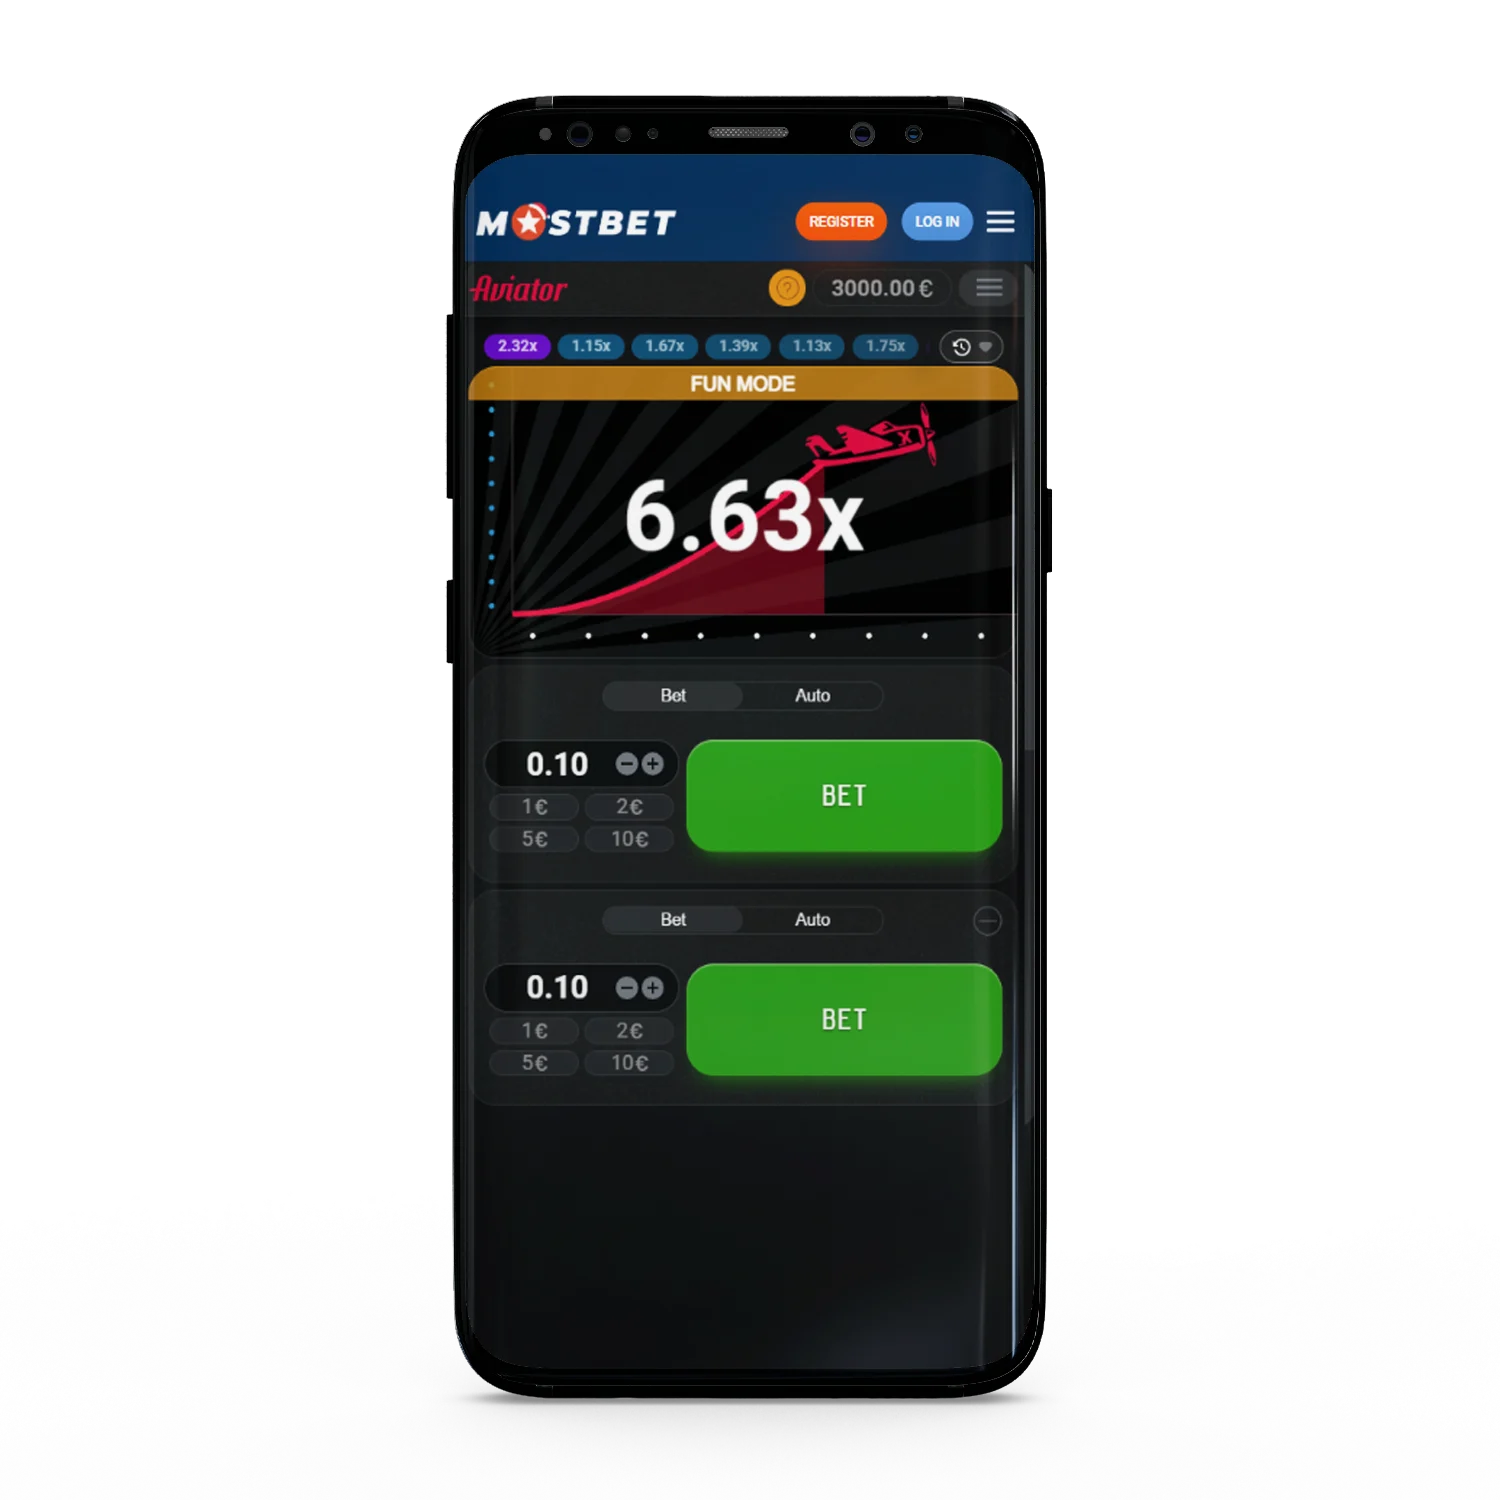 You can play Aviator in the Mostbet app.